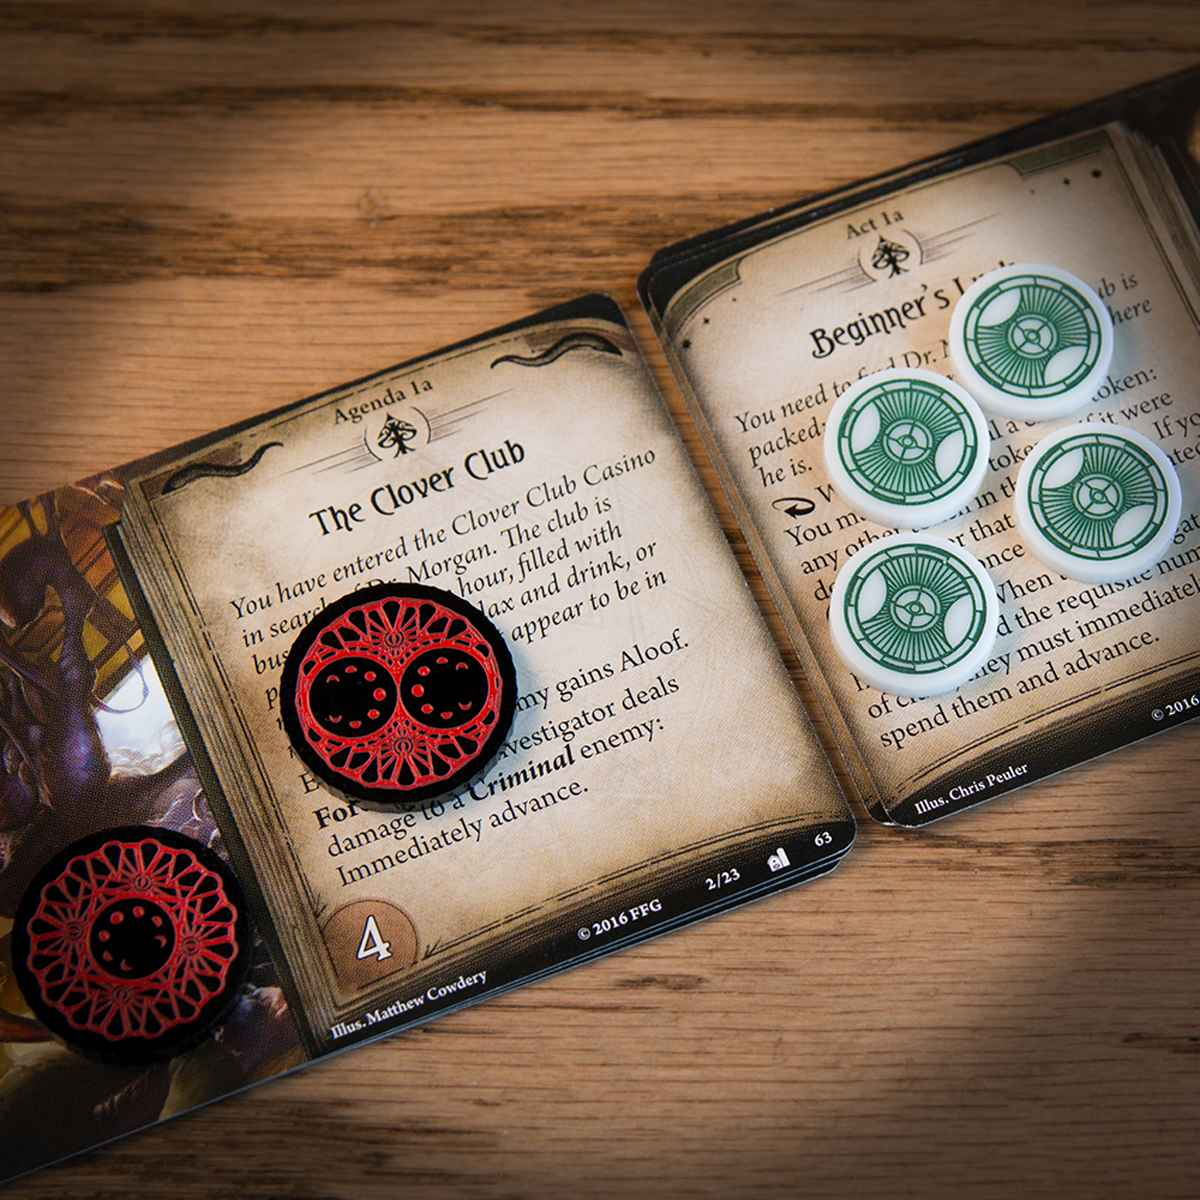 A one-value Doom and two-value Doom as well as four Clue Tokens on top of Arkham Horror LCG Act and Agenda cards